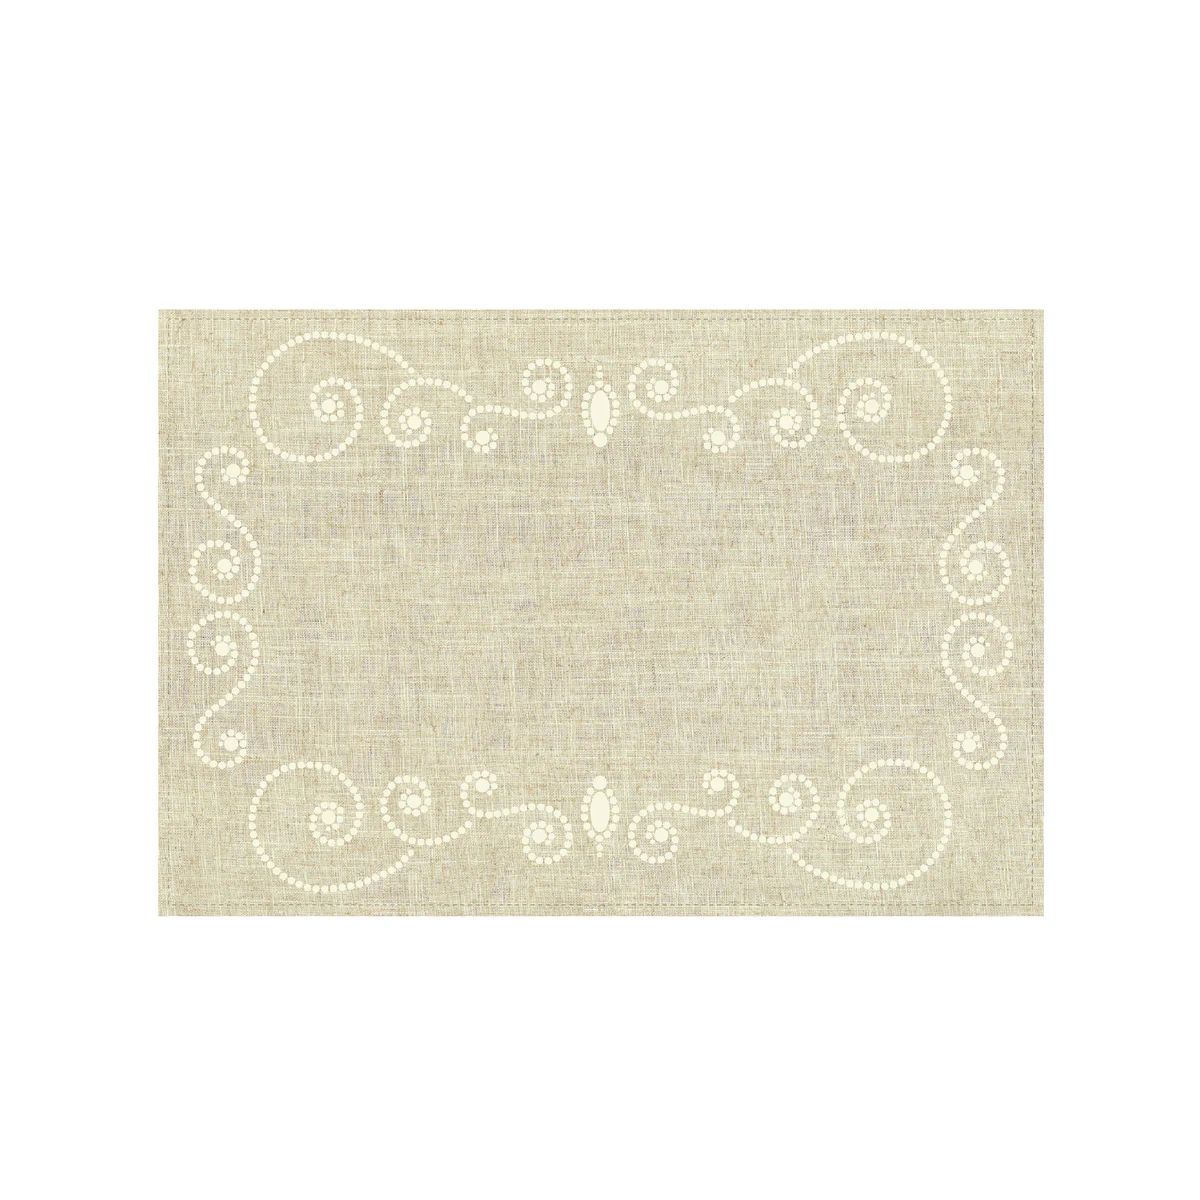 French Perle Linen Placemat | Lenox